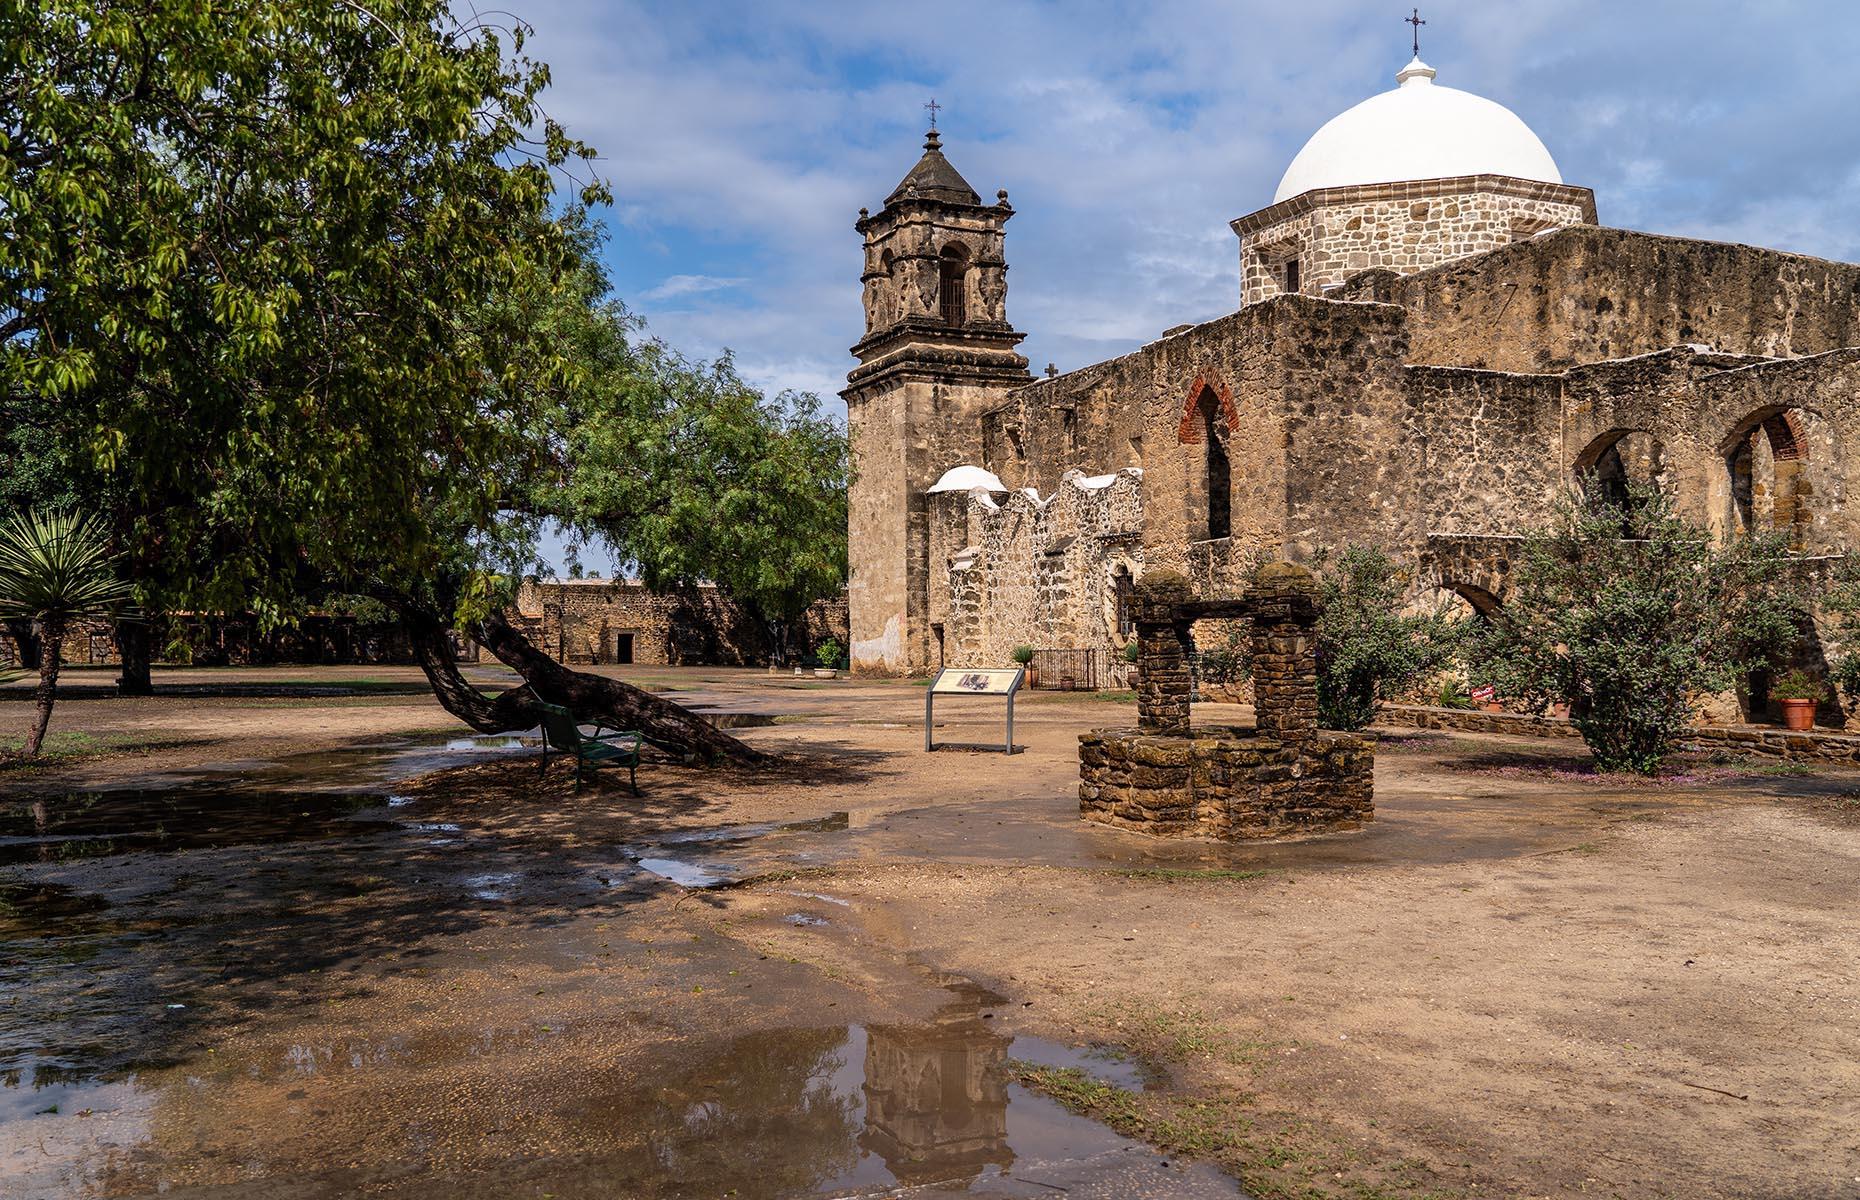 <p>The missions in San Antonio date back to the 1700s and are the only UNESCO World Heritage Site in Texas. They are a reminder of a time when drought forced the native people of South Texas to give up their traditional life to become Spanish, accepting a new religion and agrarian lifestyle in order to survive. </p>  <p>Mission San Jose, known as the “Queen of the Missions,” is the largest too, and was restored to its original design in the 1930s. Take a ranger-guided tour for unique insights into this fascinating period of Texan history.</p>